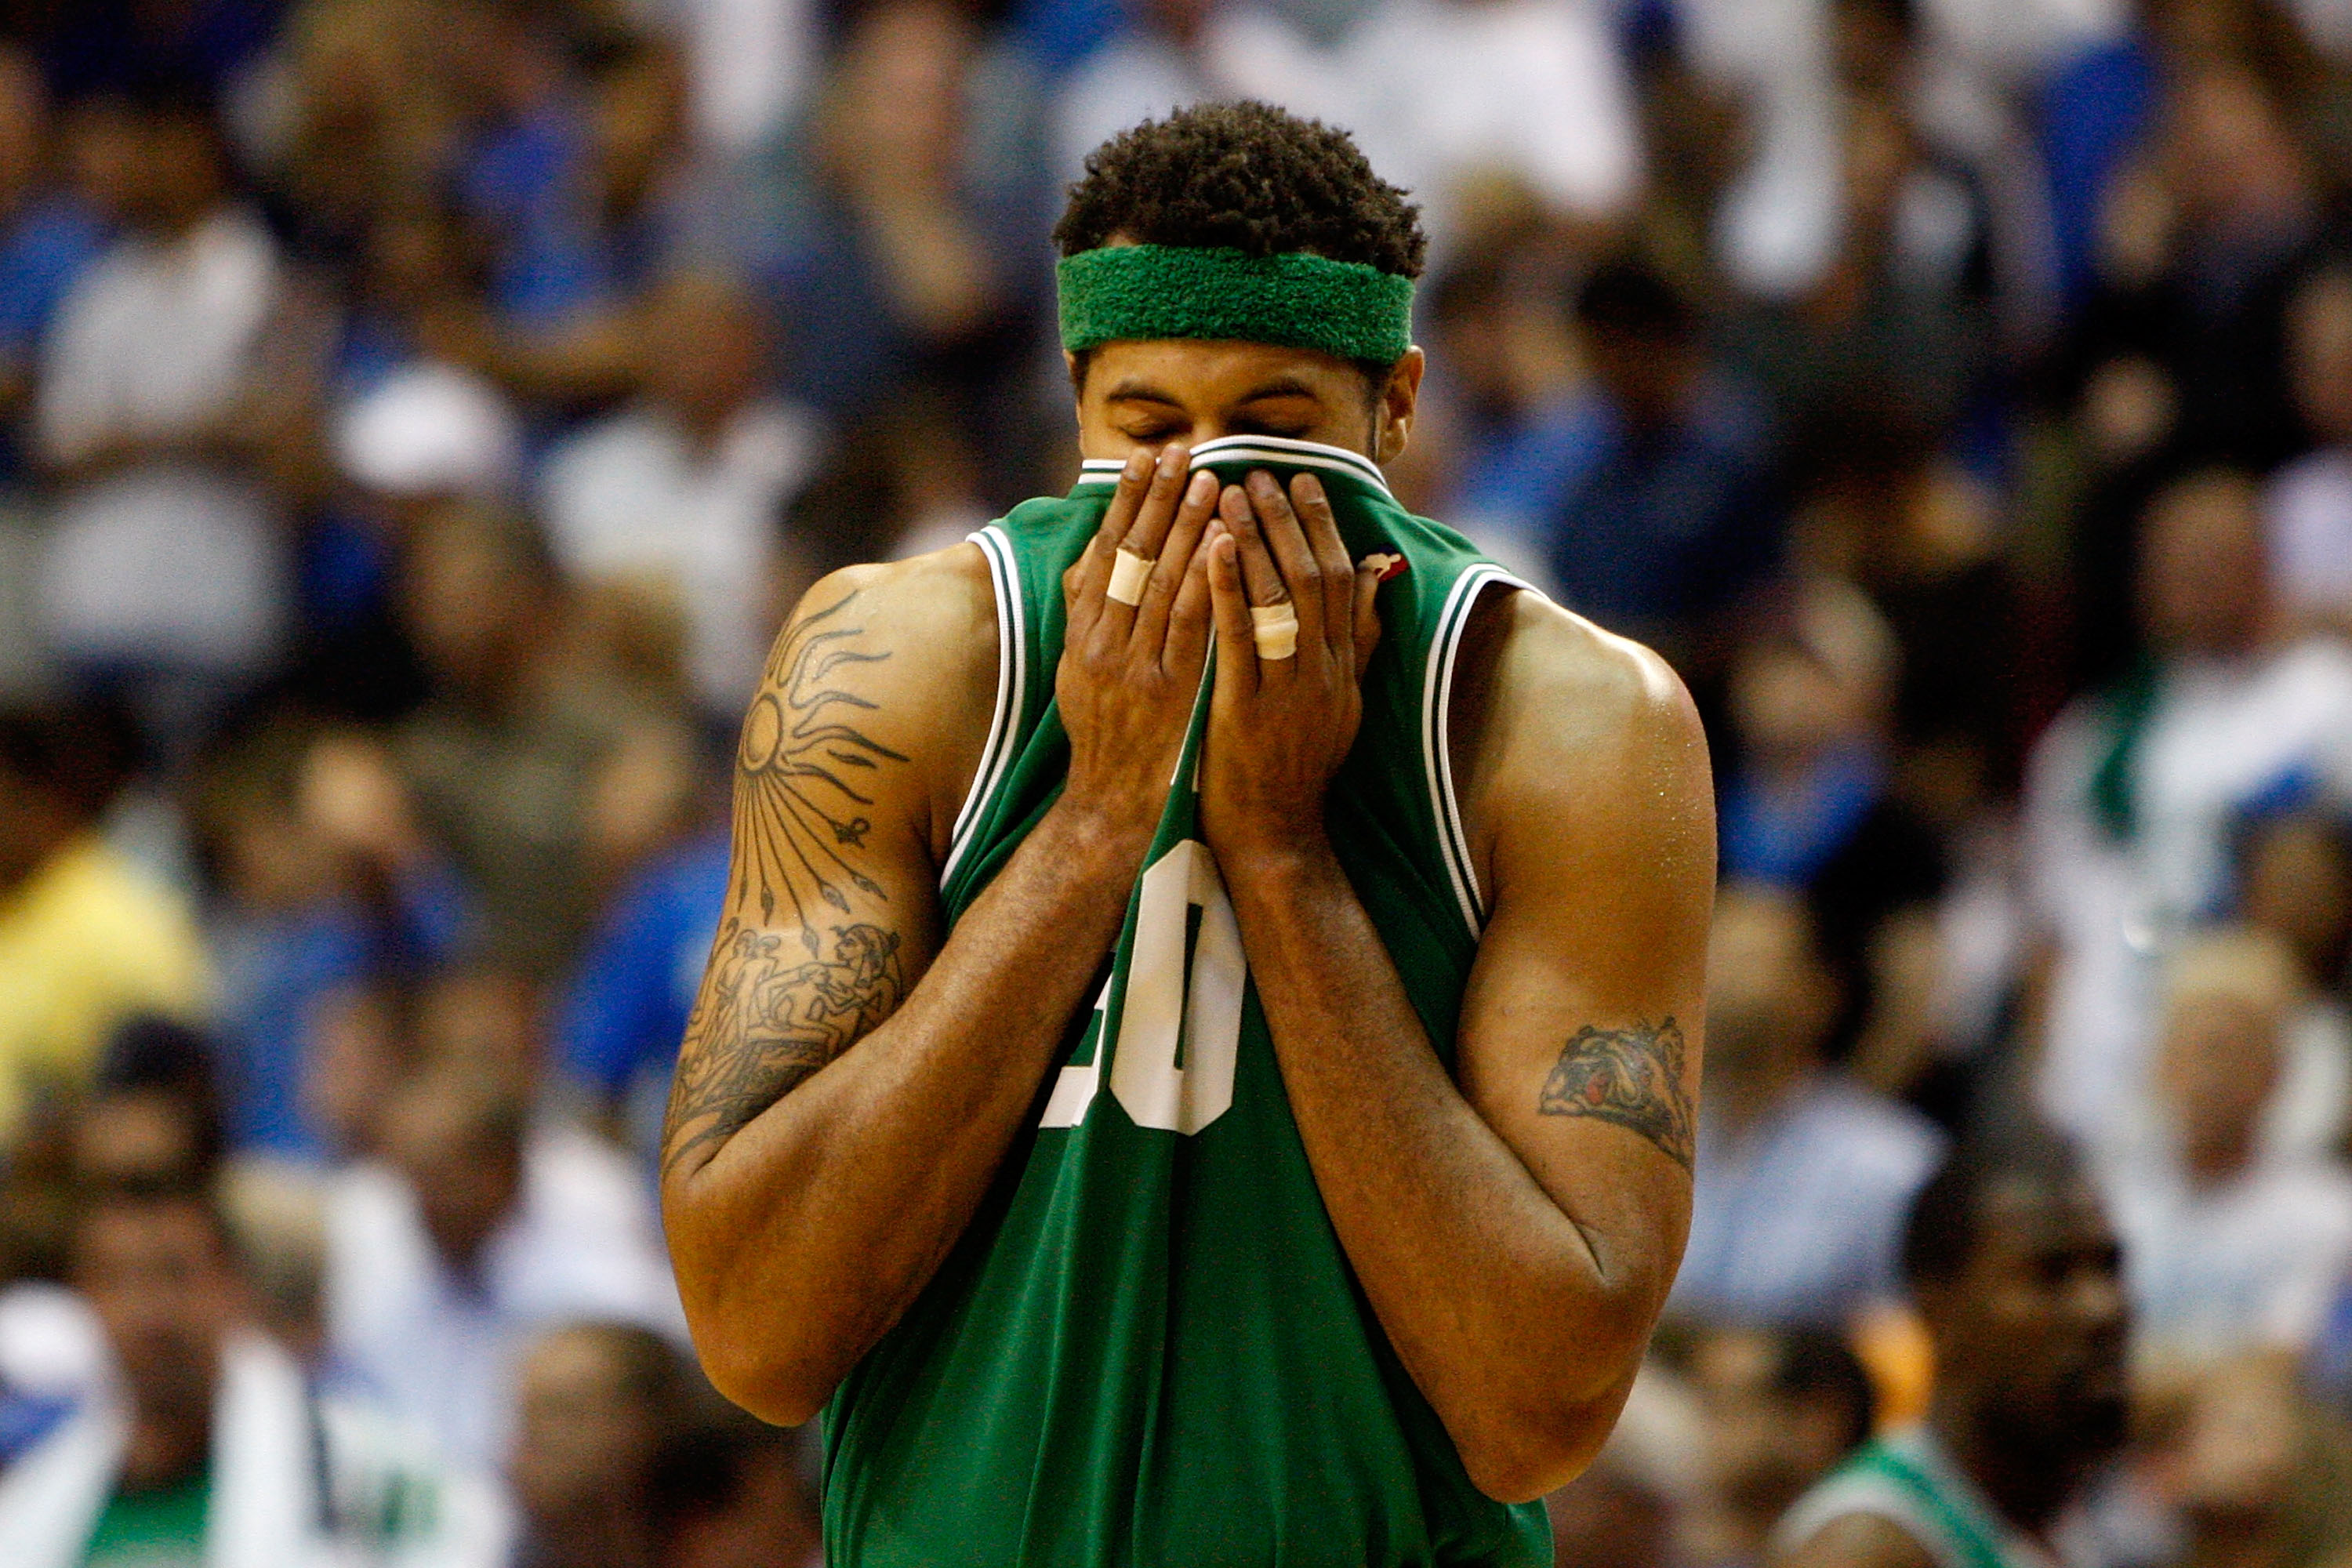 ORLANDO, FL - MAY 26:  Rasheed Walalce #30 of the Boston Celtics wipes his face with his jersey against the Orlando Magic in Game Five of the Eastern Conference Finals during the 2010 NBA Playoffs at Amway Arena on May 26, 2010 in Orlando, Florida.  NOTE